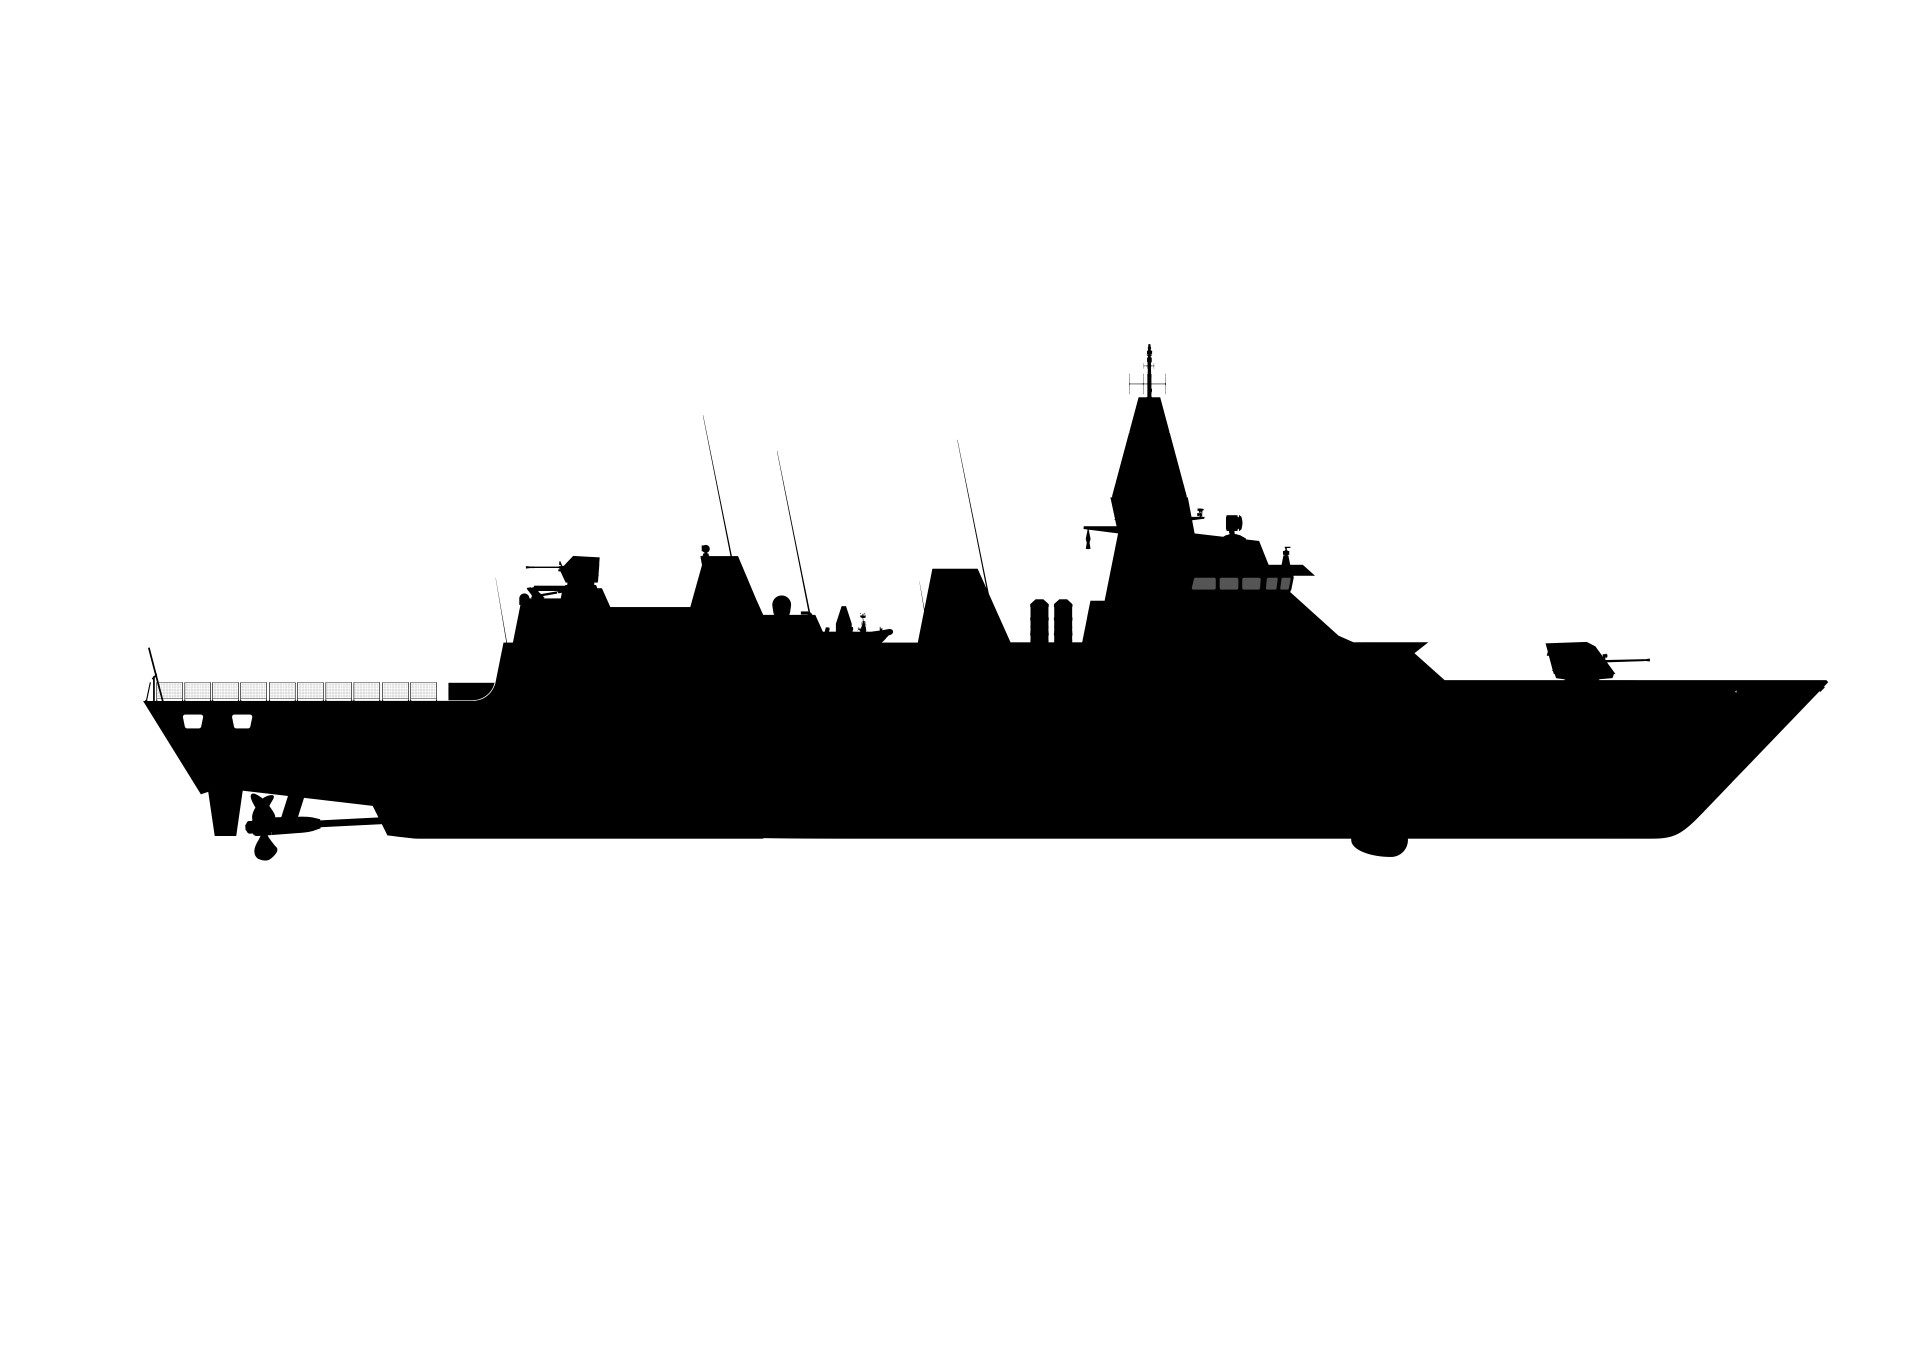 Damen and Saab announce partnership to participate on the tender for the Tamandaré Class Corvette